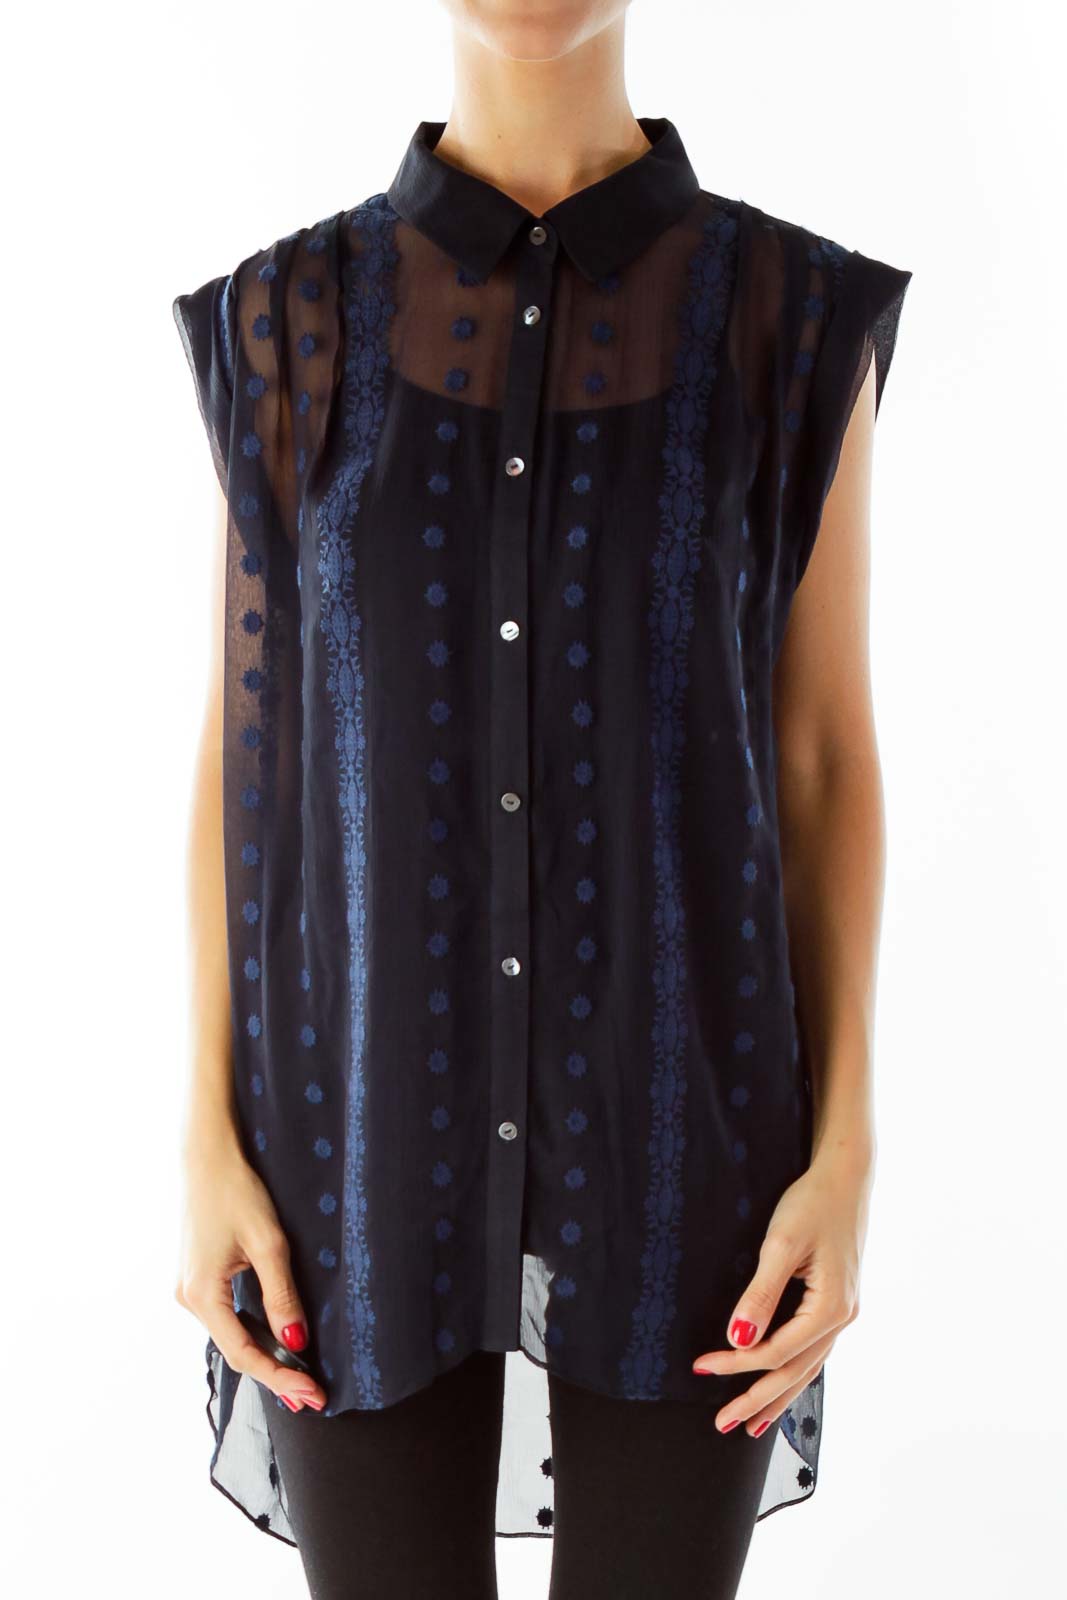 Black Blue Sheer Embroidered Sleeveless Blouse Front